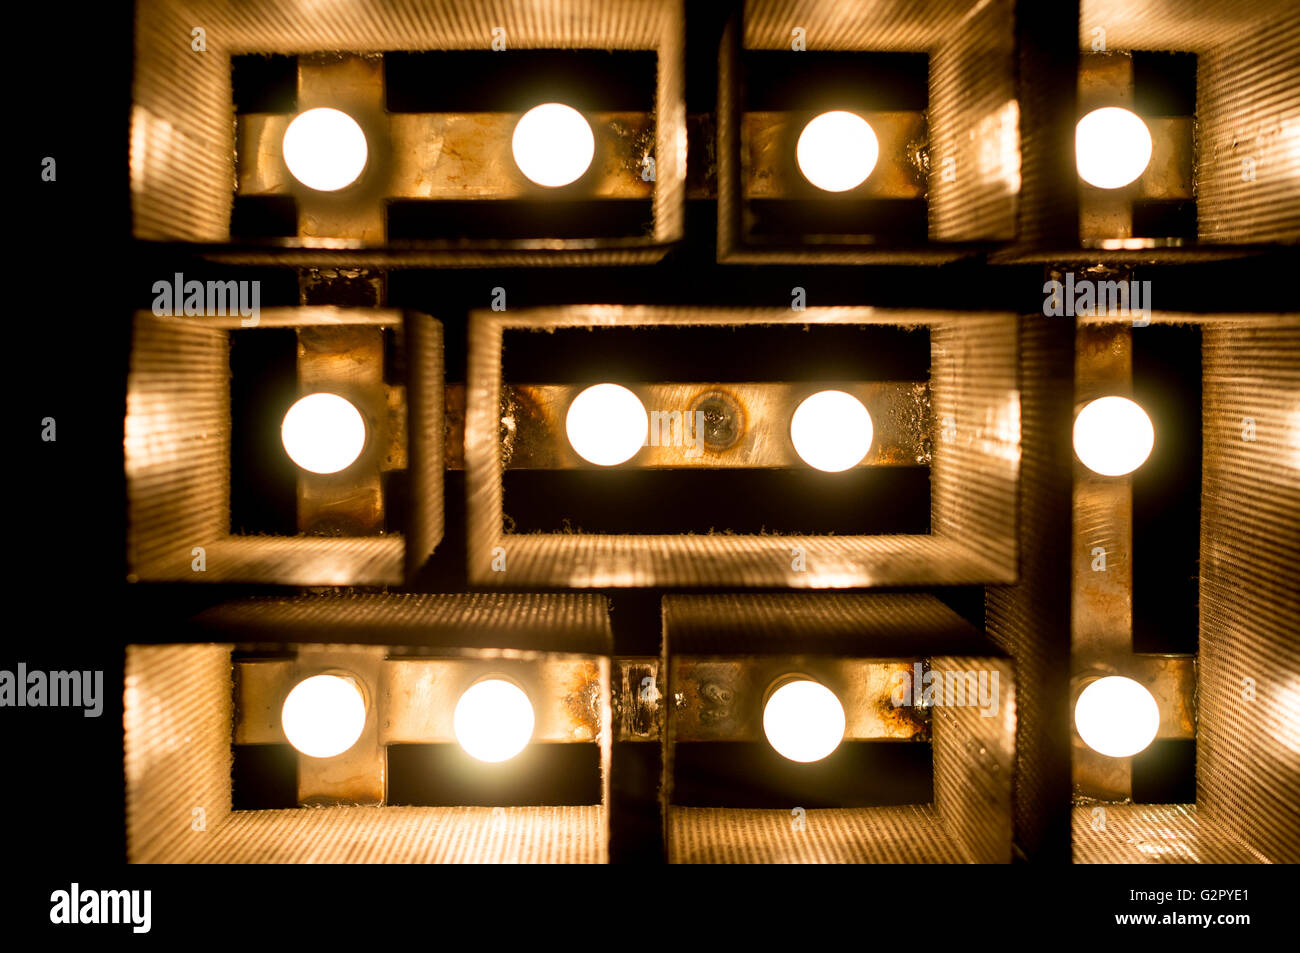 decorative indoor lights with a rectangular design and golden shades Stock Photo